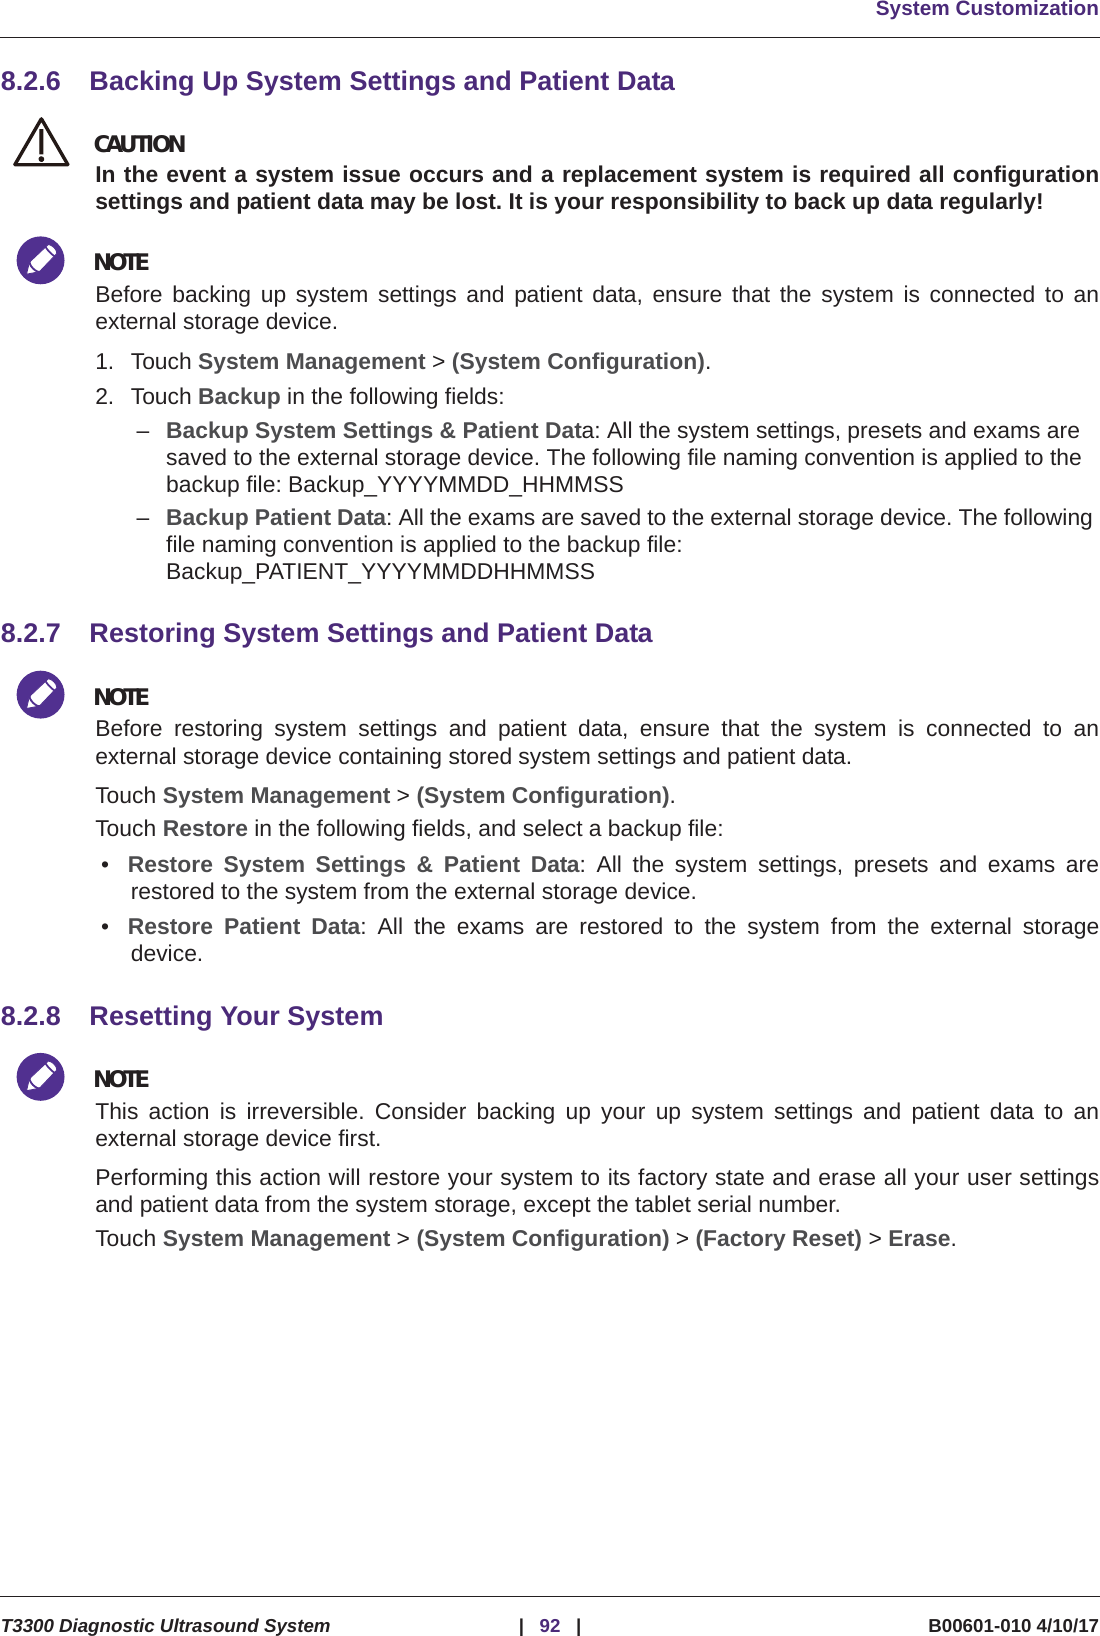 System CustomizationT3300 Diagnostic Ultrasound System |92 | B00601-010 4/10/178.2.6 Backing Up System Settings and Patient DataCAUTIONCAUTIONIn the event a system issue occurs and a replacement system is required all configurationsettings and patient data may be lost. It is your responsibility to back up data regularly!NOTEBefore backing up system settings and patient data, ensure that the system is connected to anexternal storage device.1. Touch System Management &gt; (System Configuration).2. Touch Backup in the following fields:–Backup System Settings &amp; Patient Data: All the system settings, presets and exams are saved to the external storage device. The following file naming convention is applied to the backup file: Backup_YYYYMMDD_HHMMSS–Backup Patient Data: All the exams are saved to the external storage device. The following file naming convention is applied to the backup file: Backup_PATIENT_YYYYMMDDHHMMSS8.2.7 Restoring System Settings and Patient DataNOTEBefore restoring system settings and patient data, ensure that the system is connected to anexternal storage device containing stored system settings and patient data.Touch System Management &gt; (System Configuration).Touch Restore in the following fields, and select a backup file:•Restore System Settings &amp; Patient Data: All the system settings, presets and exams arerestored to the system from the external storage device.•Restore Patient Data: All the exams are restored to the system from the external storagedevice.8.2.8 Resetting Your SystemNOTEThis action is irreversible. Consider backing up your up system settings and patient data to anexternal storage device first.Performing this action will restore your system to its factory state and erase all your user settingsand patient data from the system storage, except the tablet serial number.Touch System Management &gt; (System Configuration) &gt; (Factory Reset) &gt; Erase.